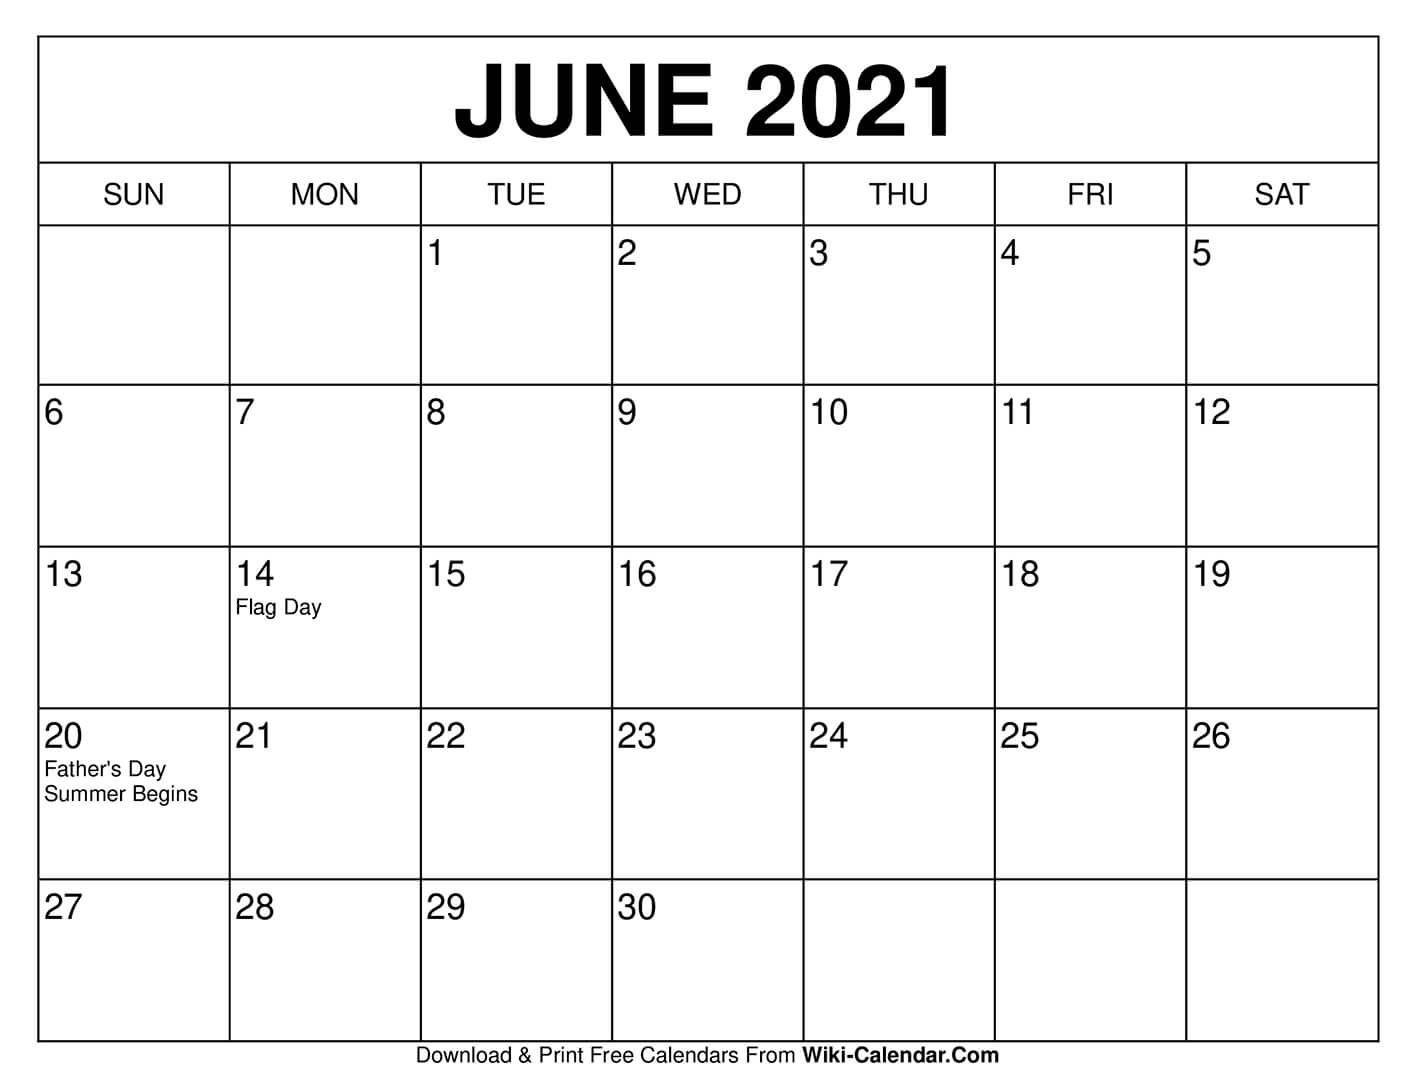 Free Printable Calendar Monday Through Friday For June-Free Monthly 2021 Calendar Showing Monday Through Friday